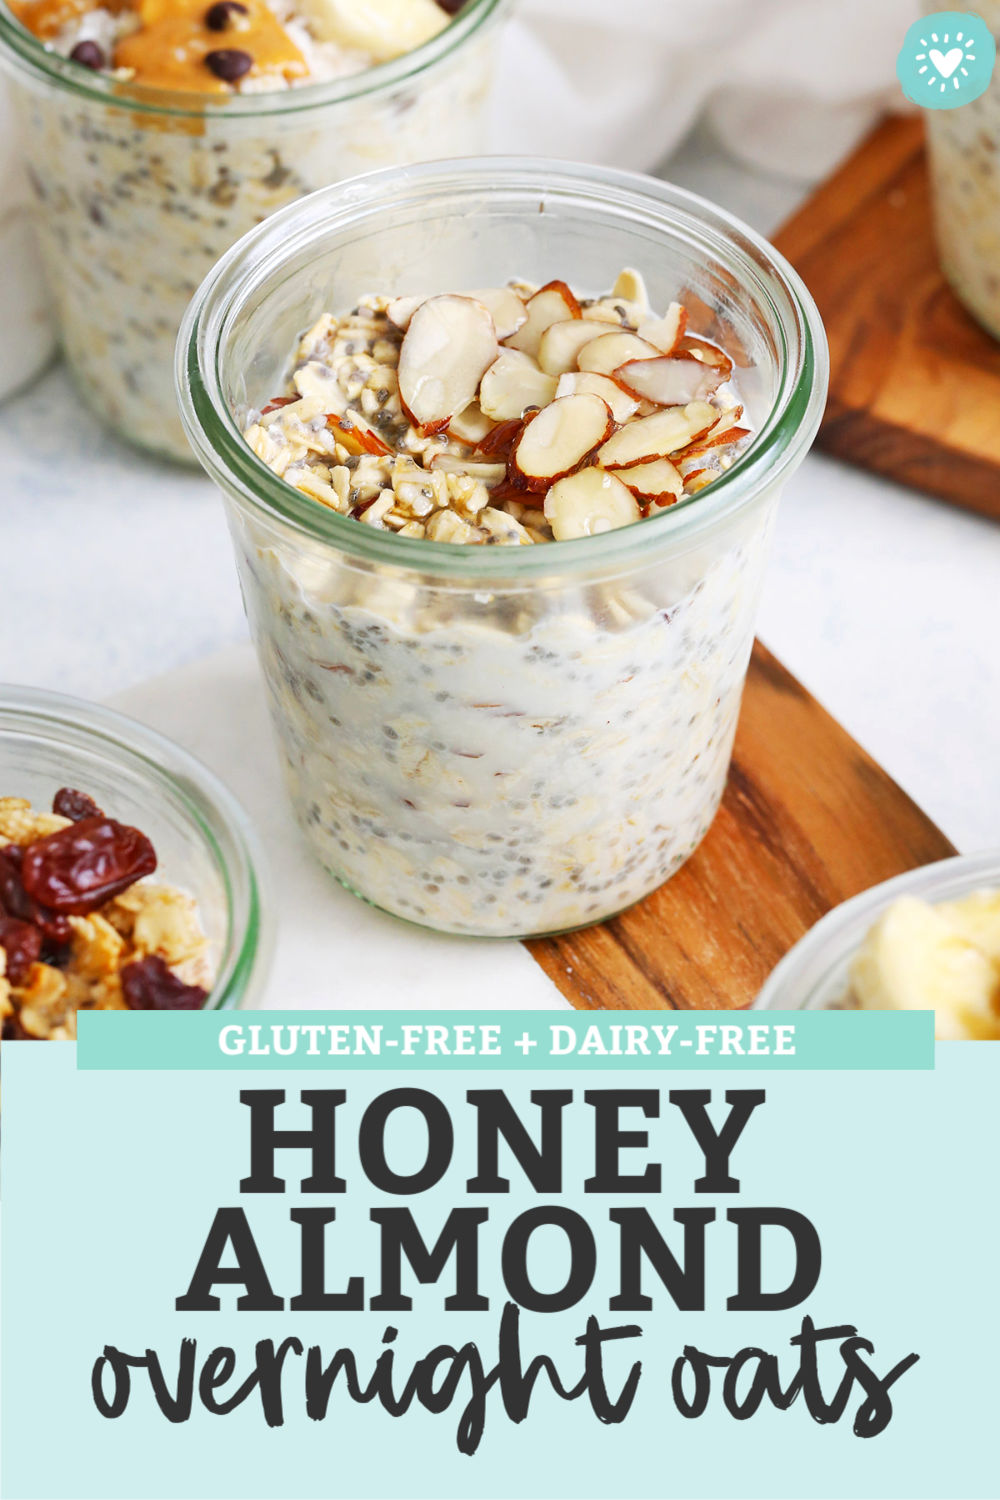 Honey Almond Overnight Oats - Creamy overnight oats studded with crunchy almonds and a kiss of honey. This is one delicious meal prep breakfast!  (Gluten-free) // Meal Prep Breakfast // Almond Overnight Oats // Healthy Breakfast // Honey almond overnight oatmeal // honey overnight oats // easy almond overnight oats